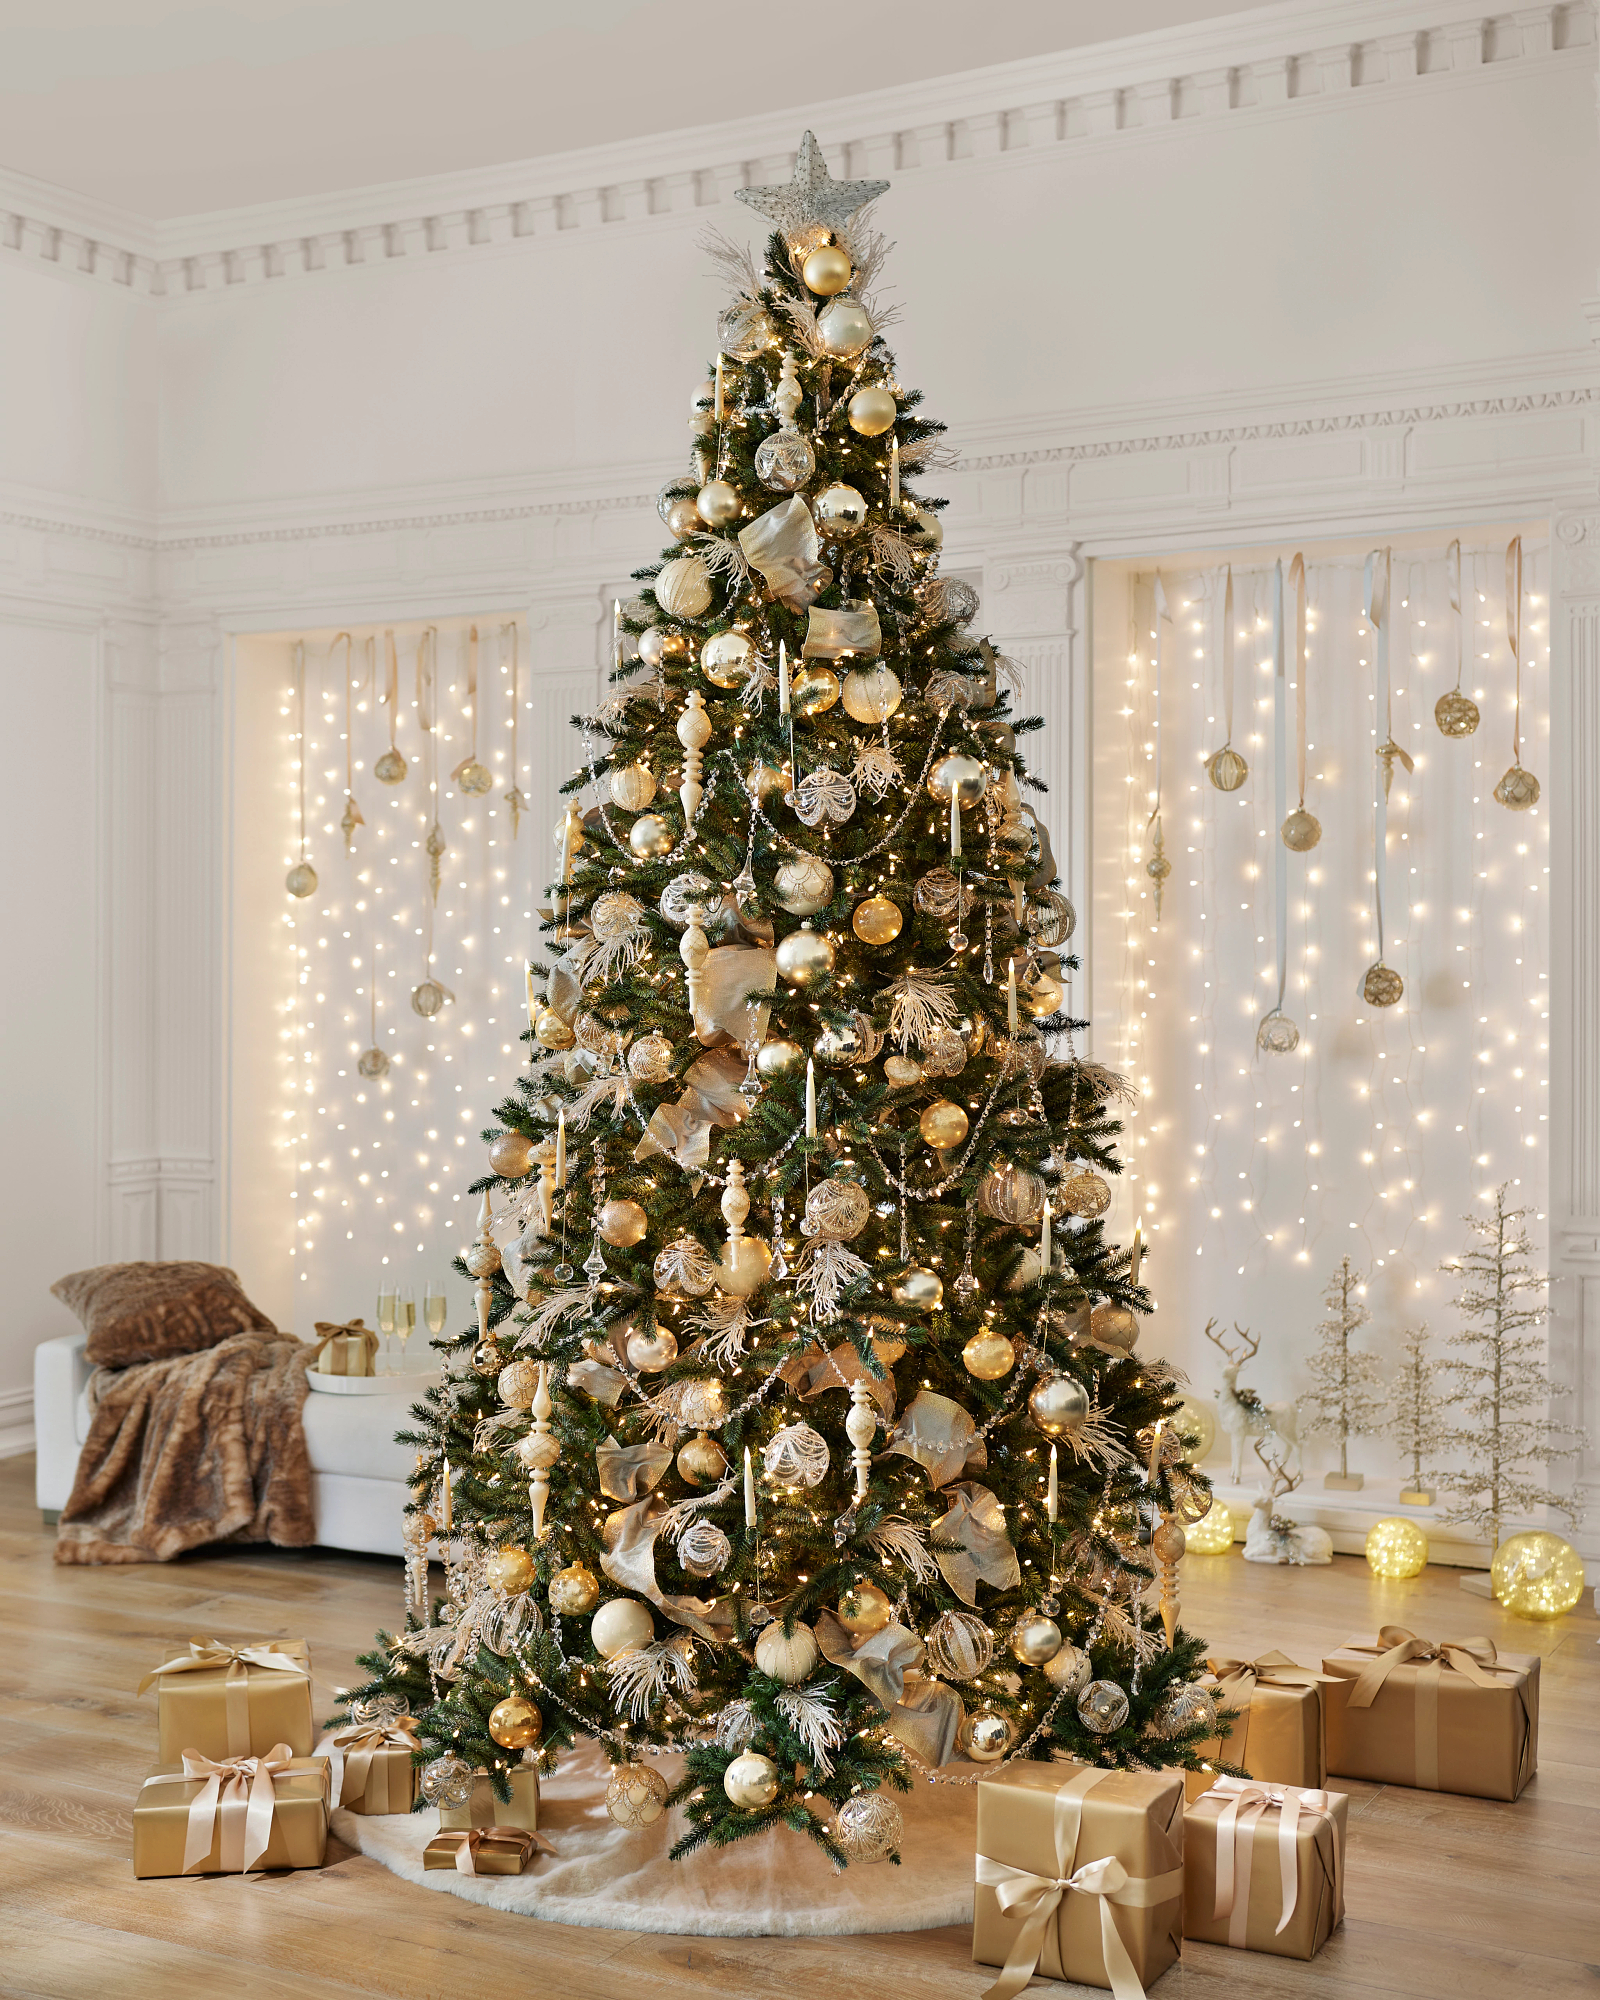 35 Picture-Perfect Christmas Tree Ideas You Have Never Seen Before  Gold christmas  decorations, Gold christmas tree decorations, Gold christmas tree